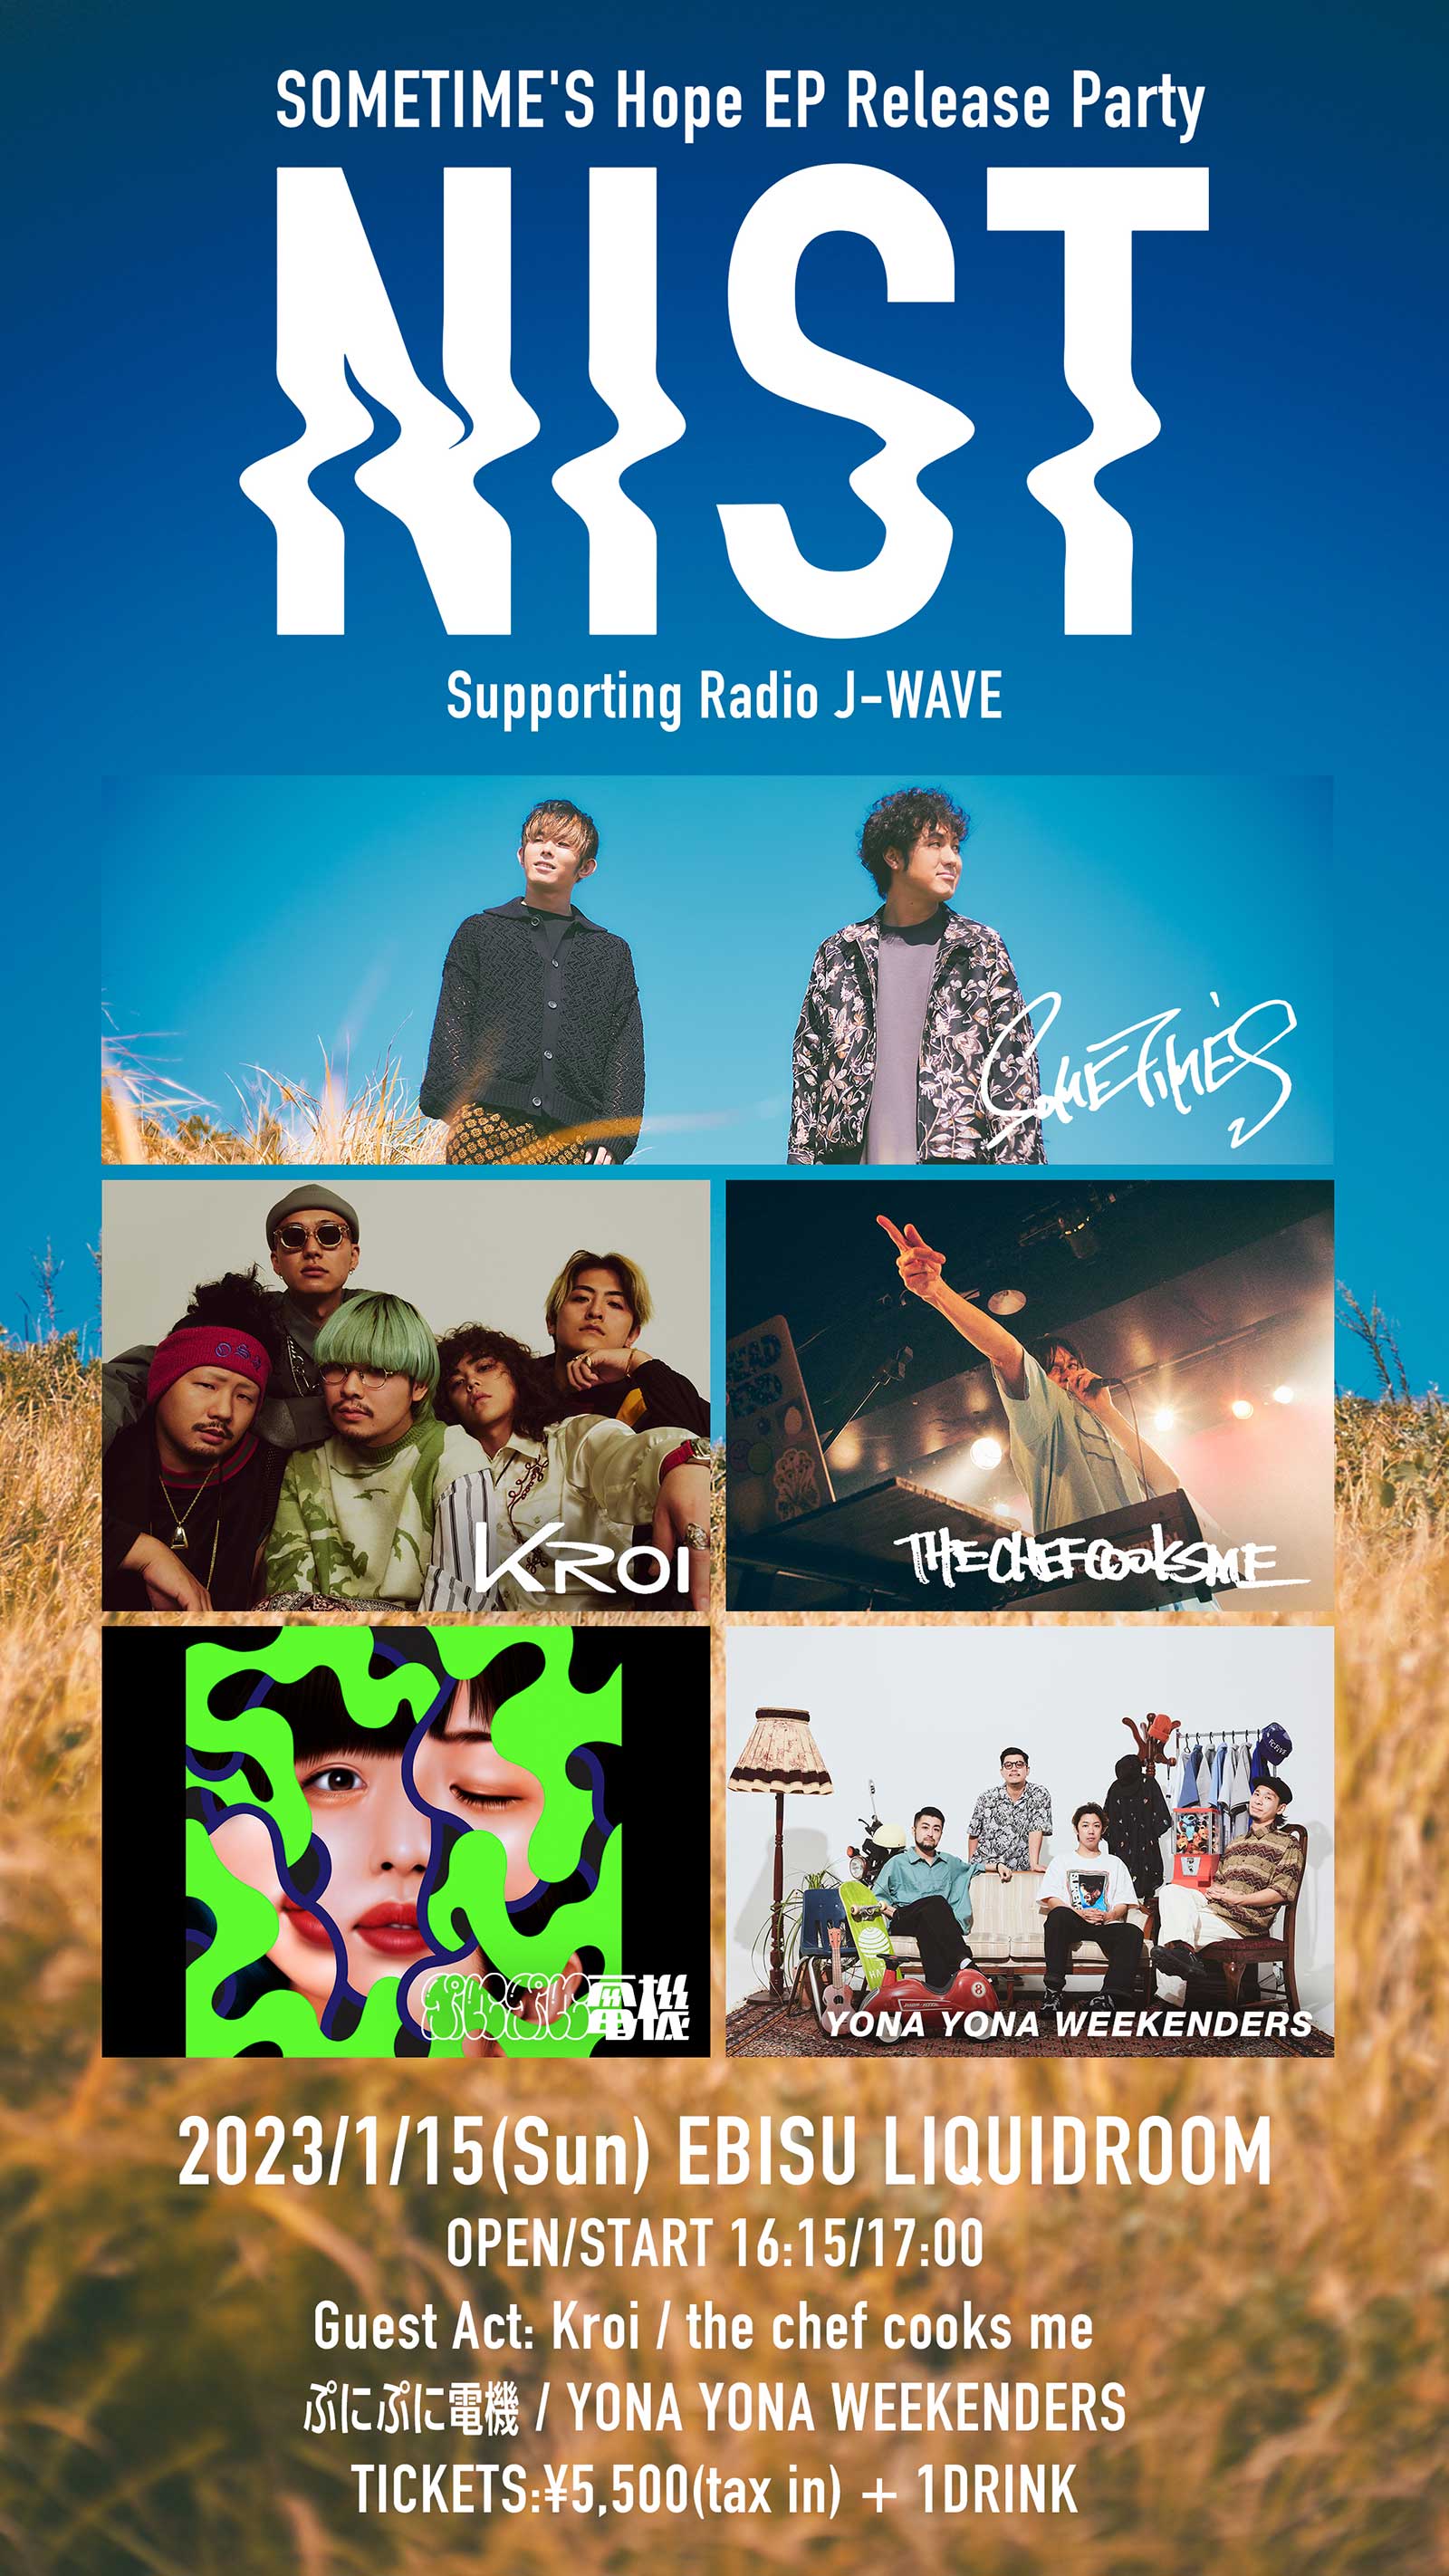 『SOMETIME'S Hope EP Release Party 「NIST」 Supporting Radio J-WAVE』